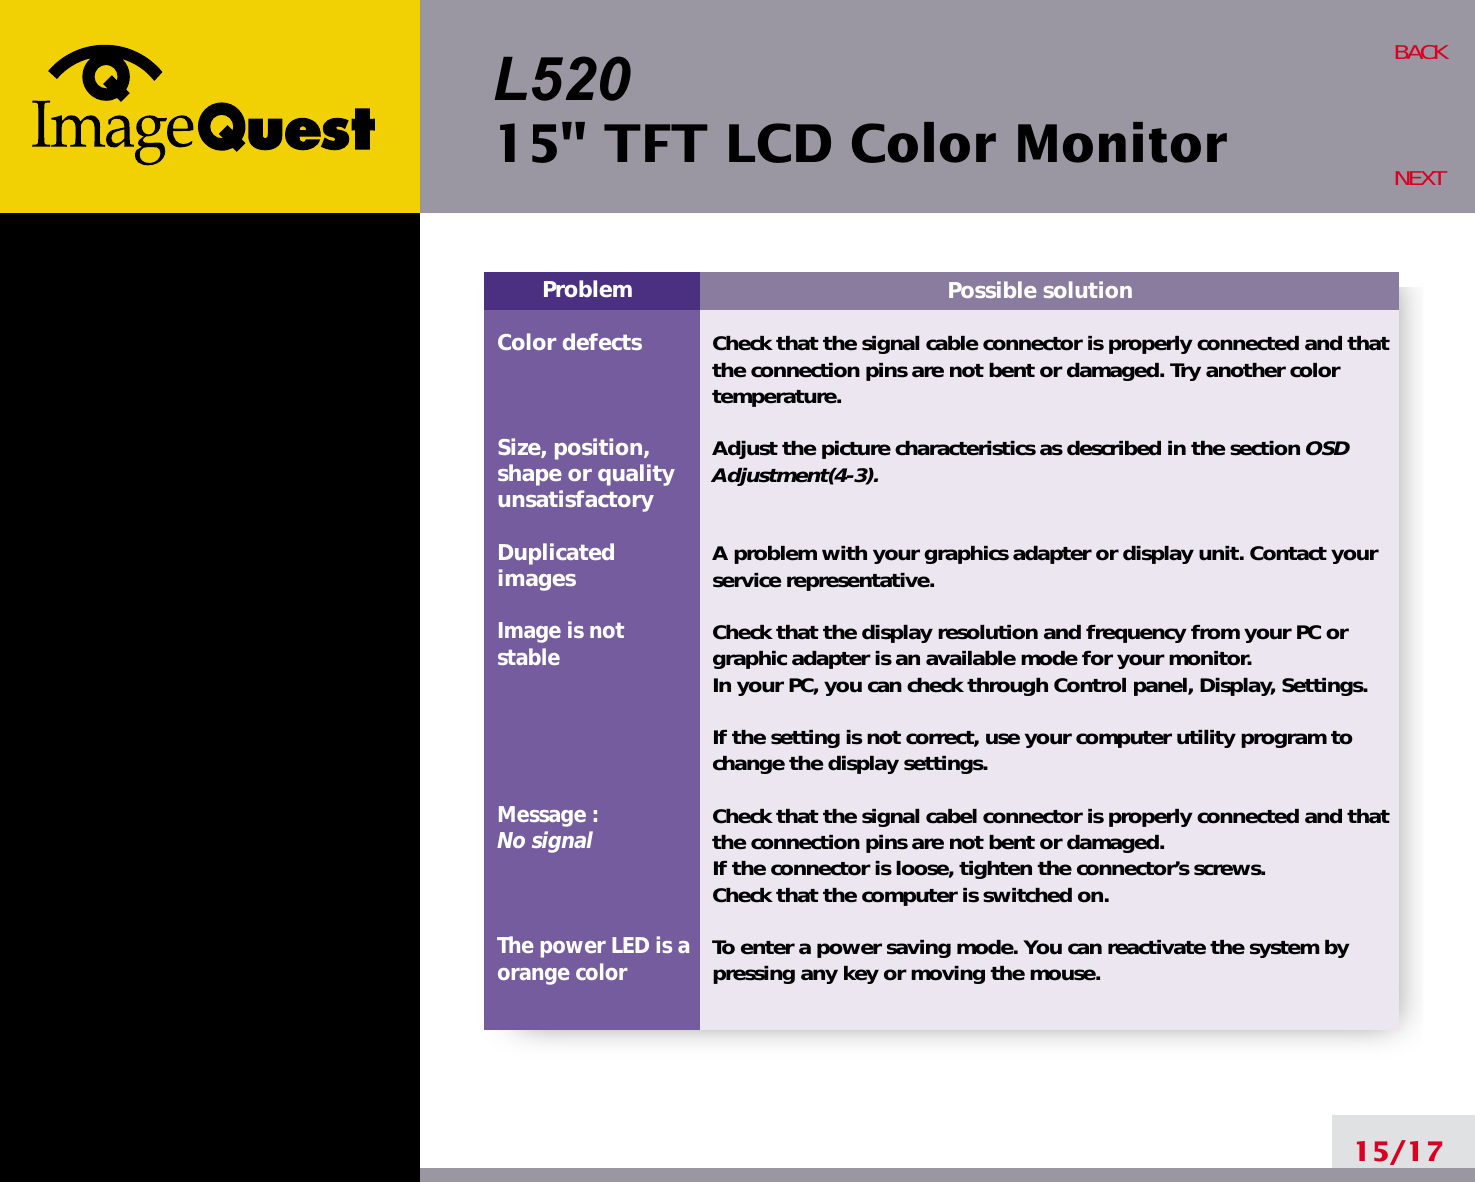 L52015&quot; TFT LCD Color Monitor15/17BACKNEXTPossible solutionCheck that the signal cable connector is properly connected and thatthe connection pins are not bent or damaged. Try another colortemperature. Adjust the picture characteristics as described in the section OSDAdjustment(4-3).A problem with your graphics adapter or display unit. Contact yourservice representative.Check that the display resolution and frequency from your PC orgraphic adapter is an available mode for your monitor.In your PC, you can check through Control panel, Display, Settings.If the setting is not correct, use your computer utility program tochange the display settings.Check that the signal cabel connector is properly connected and thatthe connection pins are not bent or damaged.If the connector is loose, tighten the connector’s screws.Check that the computer is switched on.To enter a power saving mode. You can reactivate the system bypressing any key or moving the mouse.ProblemColor defectsSize, position,shape or qualityunsatisfactoryDuplicatedimagesImage is notstableMessage : No signalThe power LED is aorange color